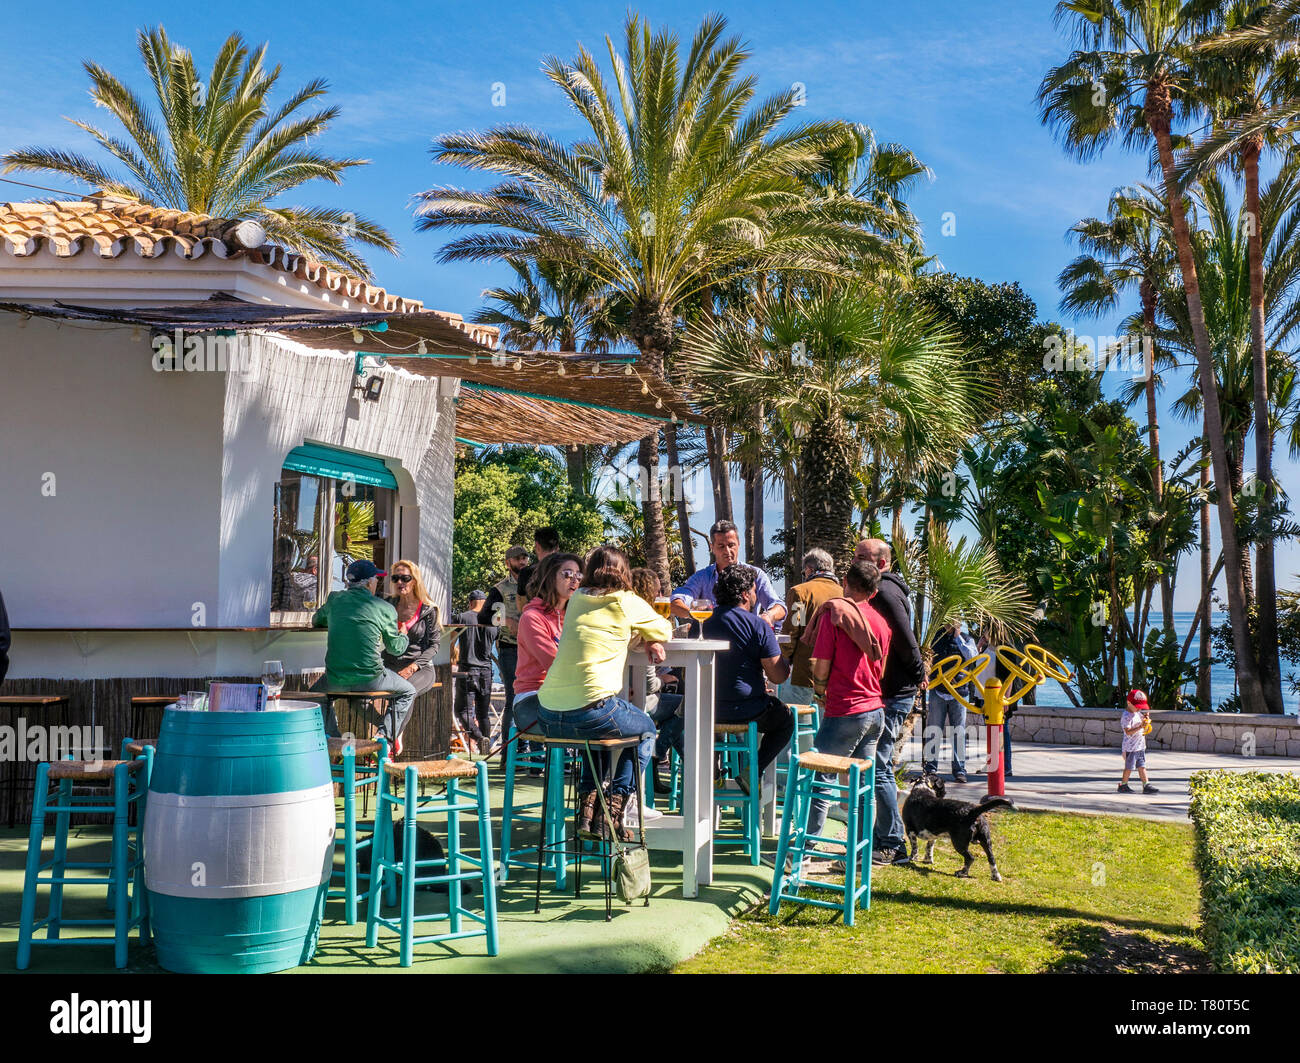 Marbella alfresco tapas drinks beach bar in verdant oasis surrounded by palm trees with Mediterranean sea behind Costa del Sol Marbella Malaga Spain Stock Photo